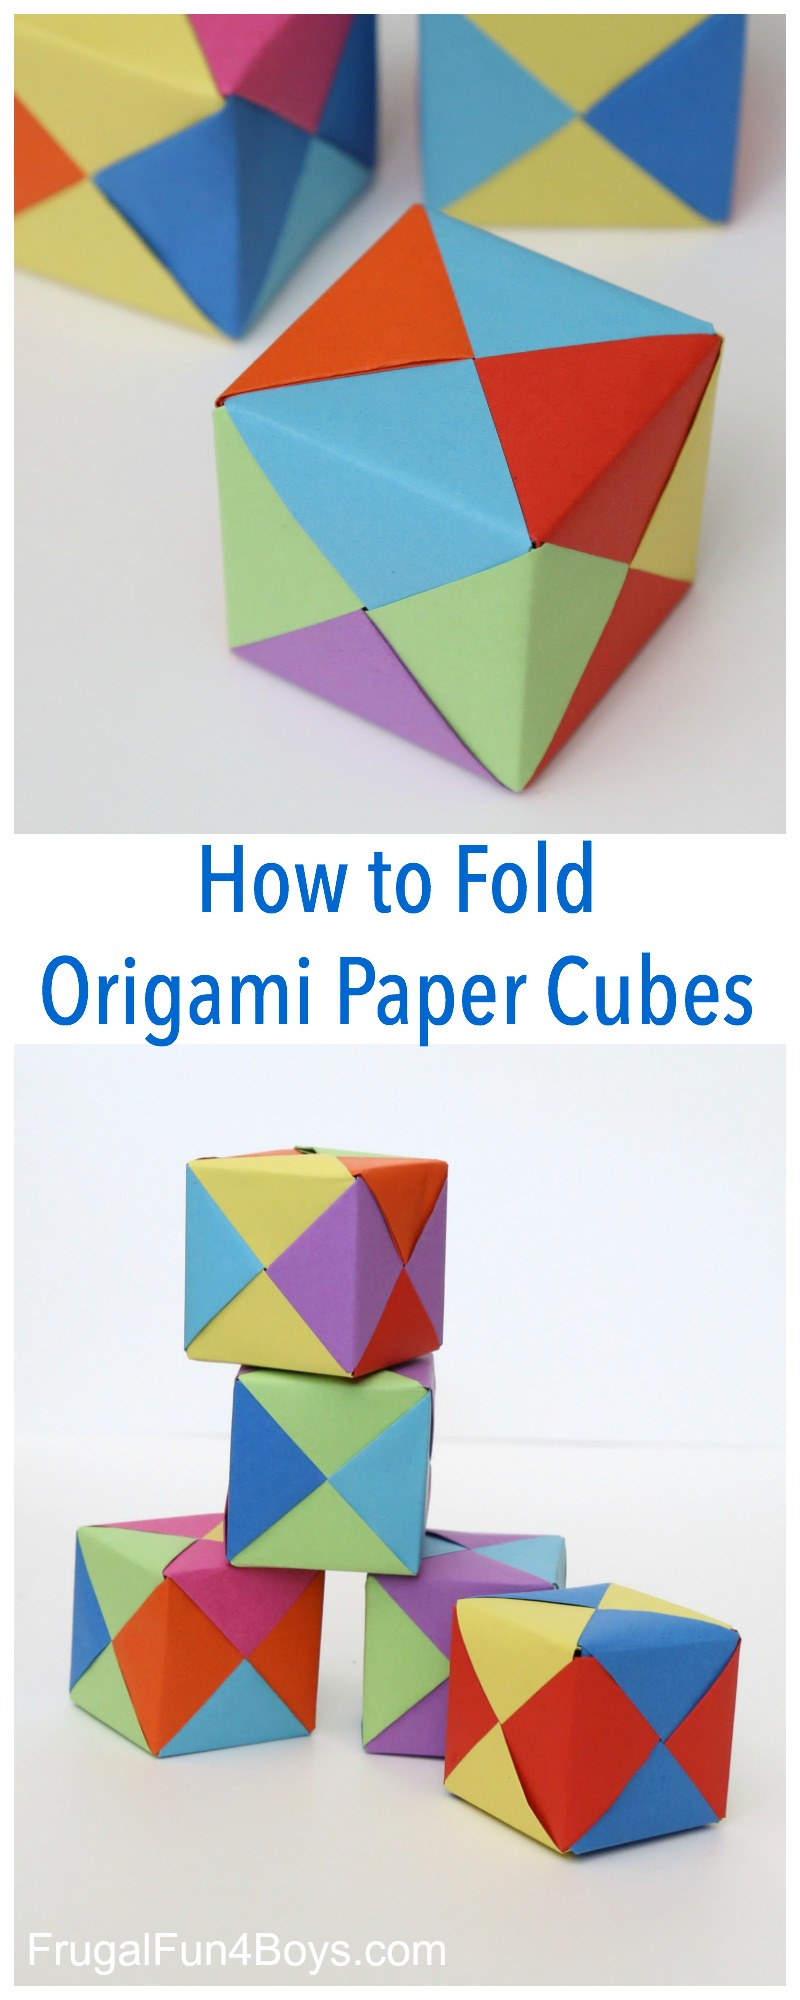 Origami Paper Images How To Fold Origami Paper Cubes Frugal Fun For Boys And Girls